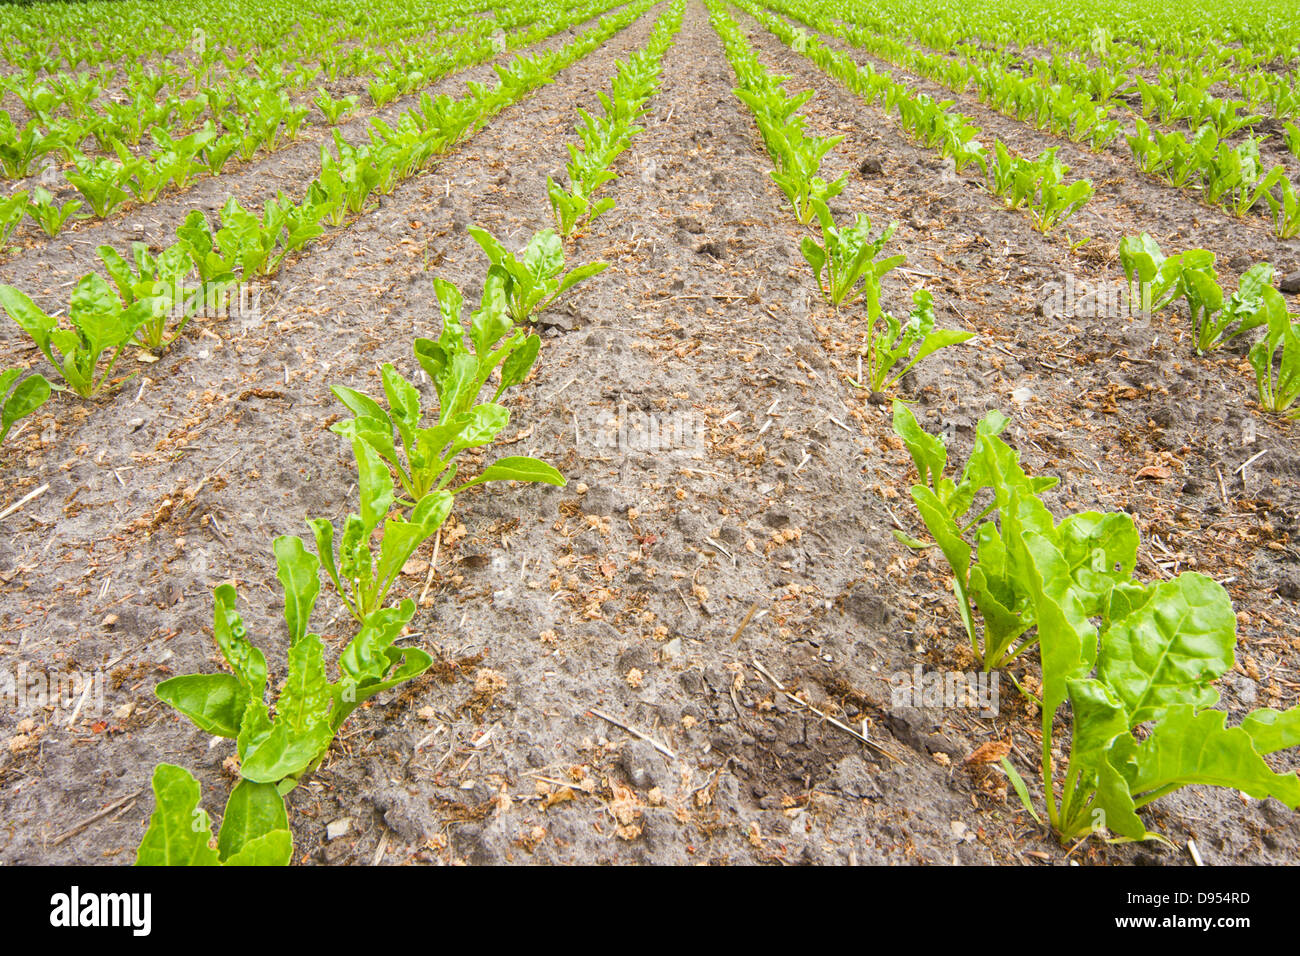 Young Sugar beet plants in rows on a field Stock Photo